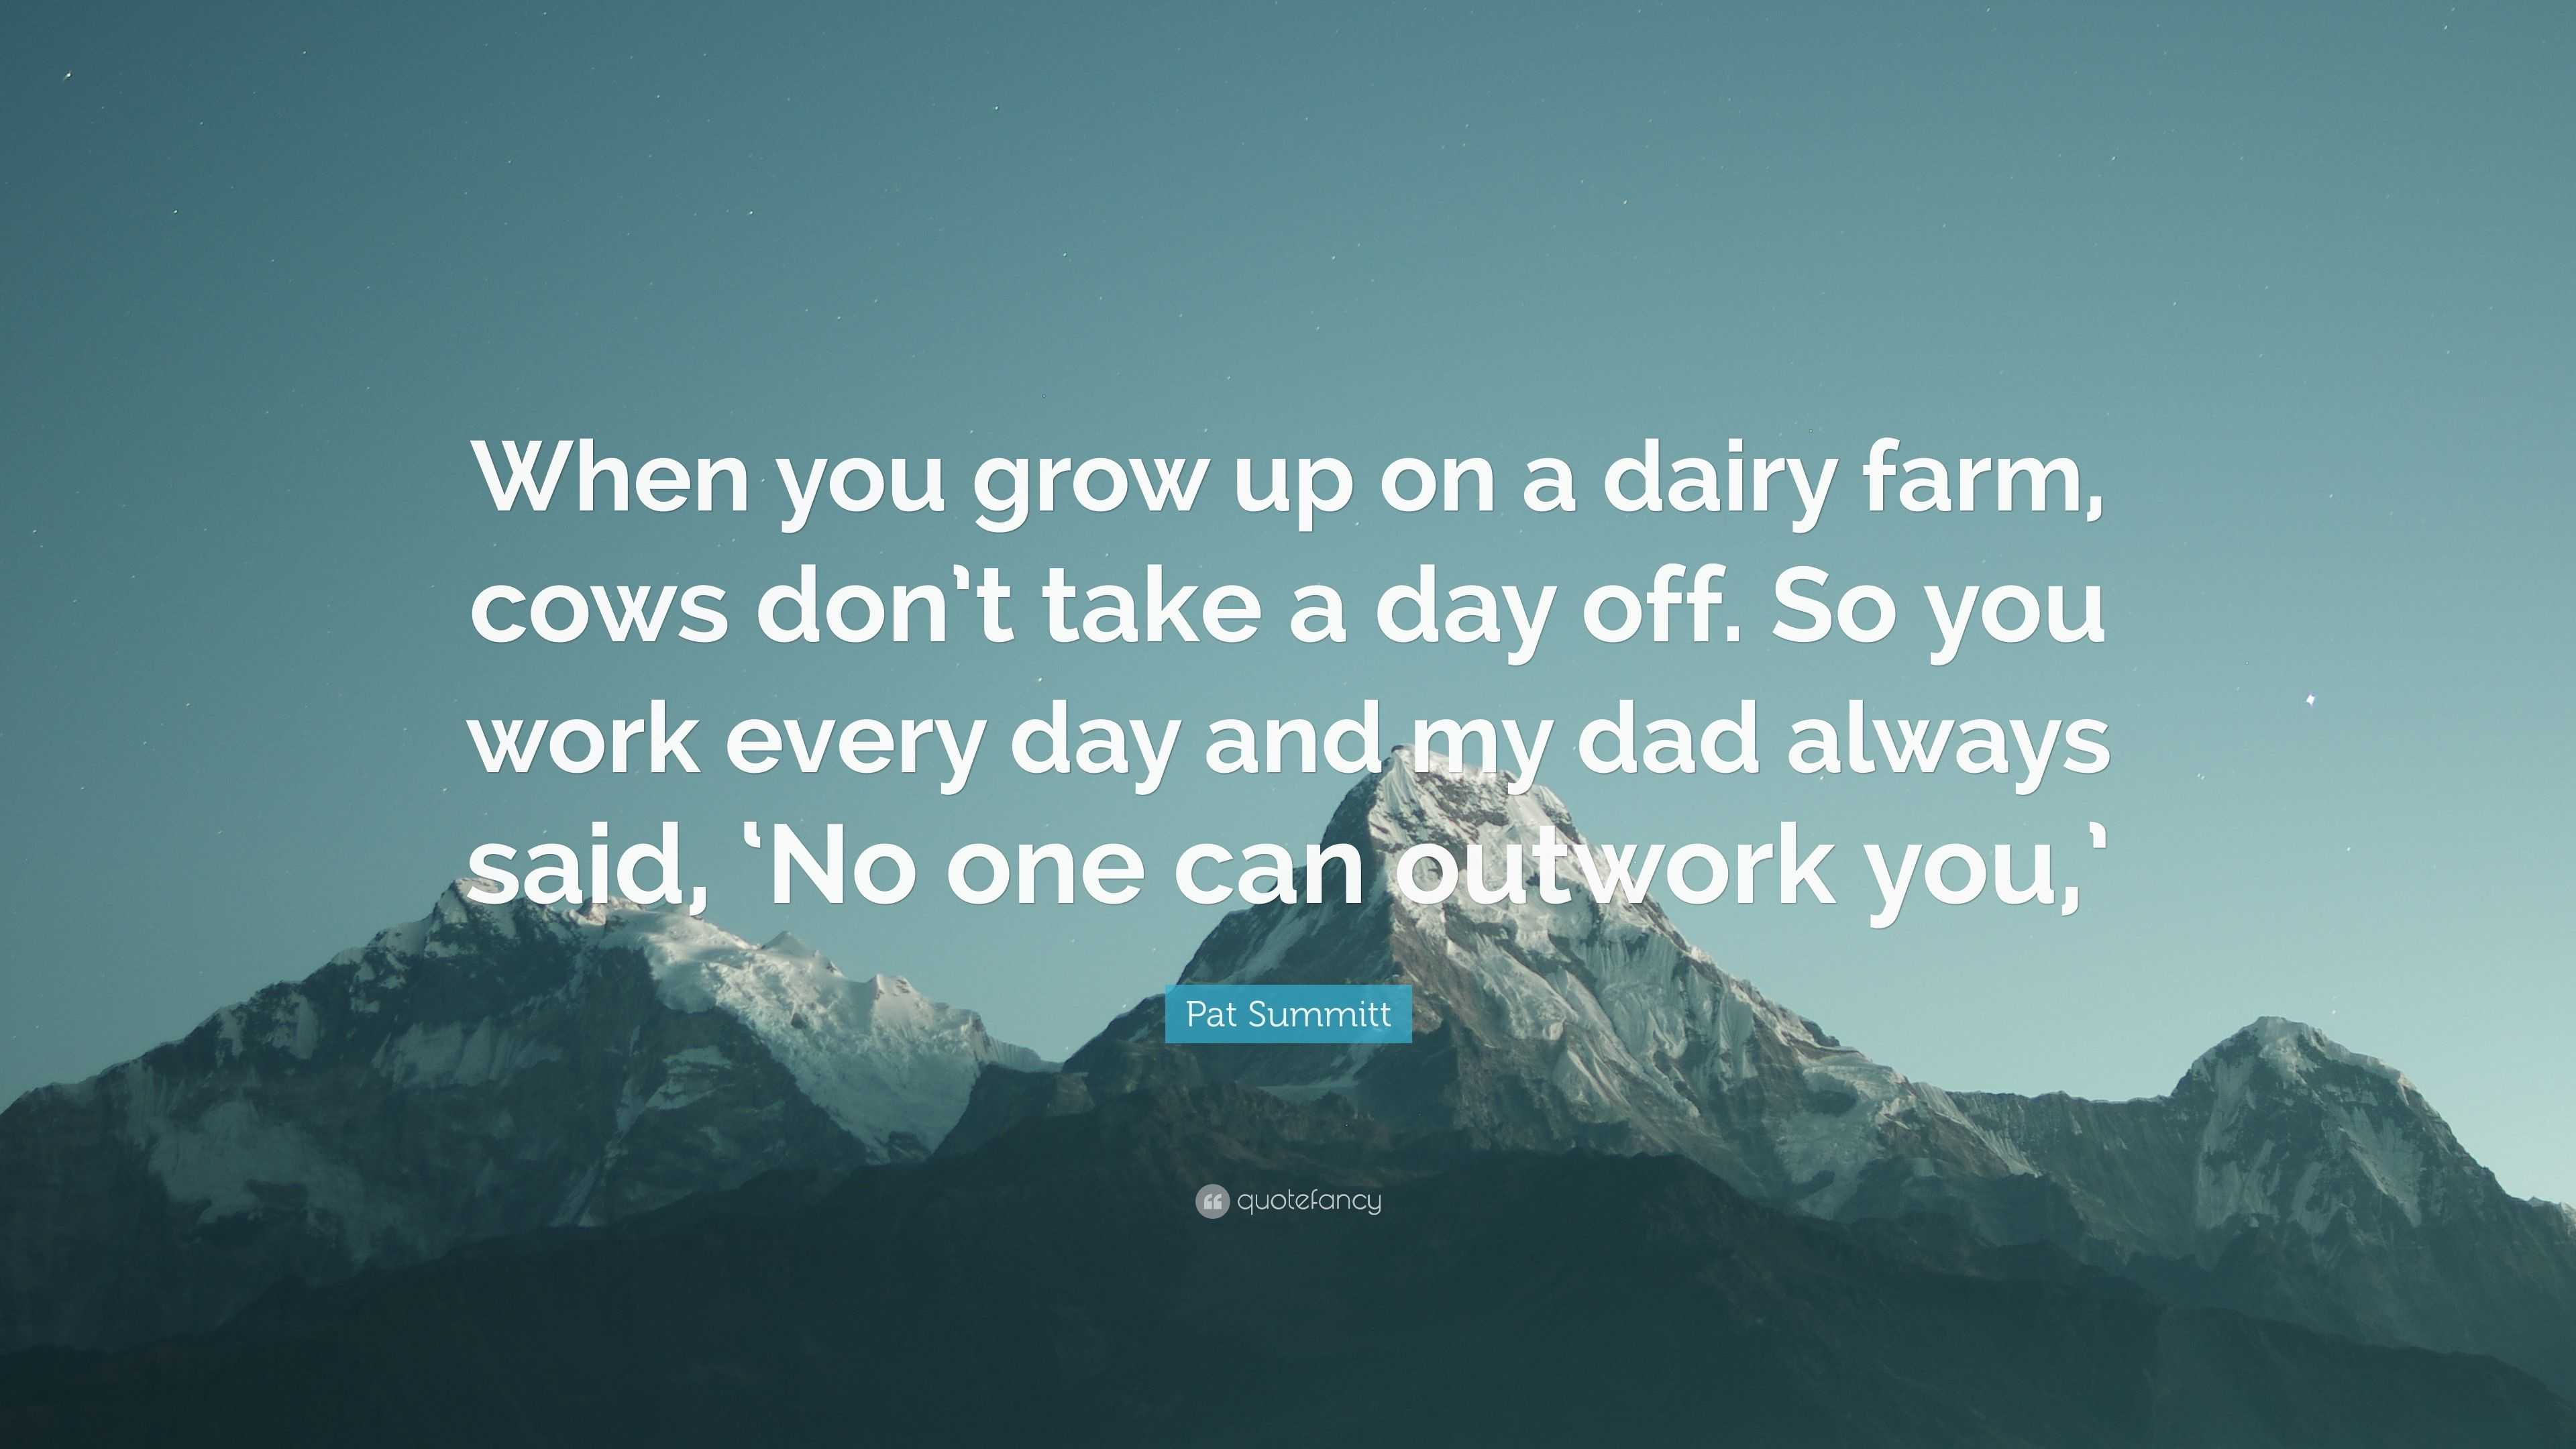 Pat Summitt Quote: “When you grow up on a dairy farm, cows don’t take a ...